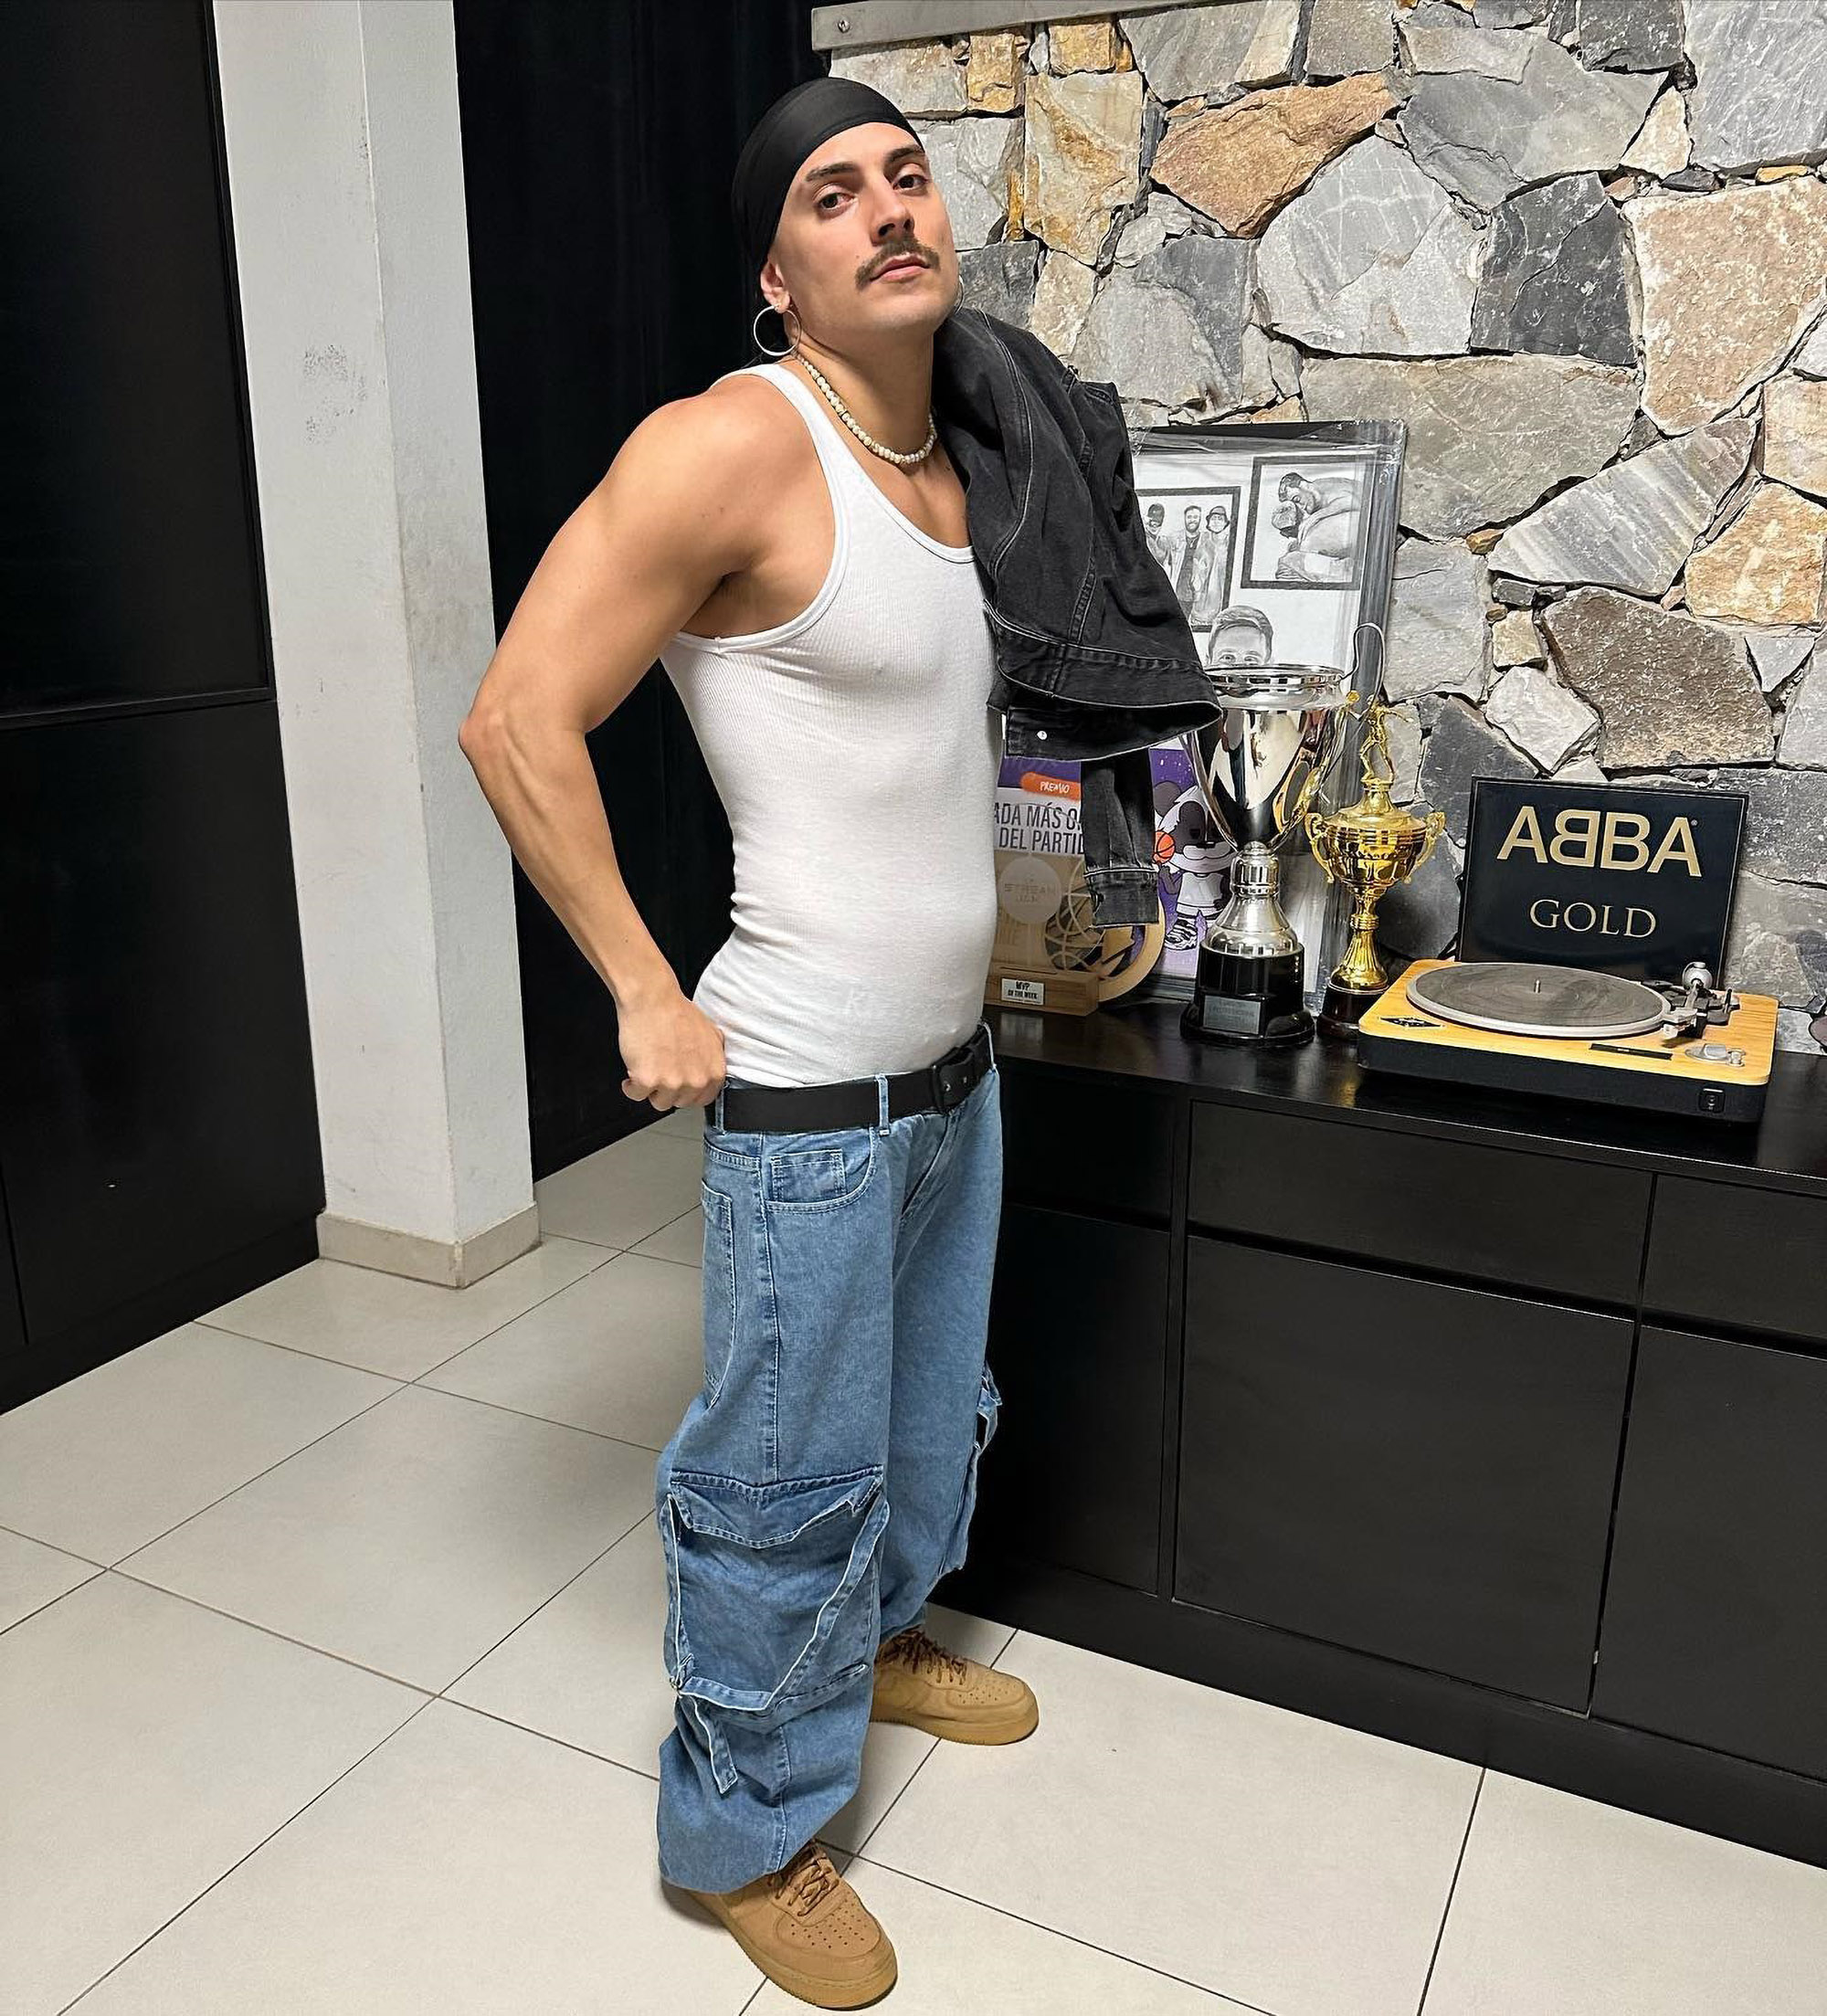 Argentinian streamer Coscu poses in an undated photo